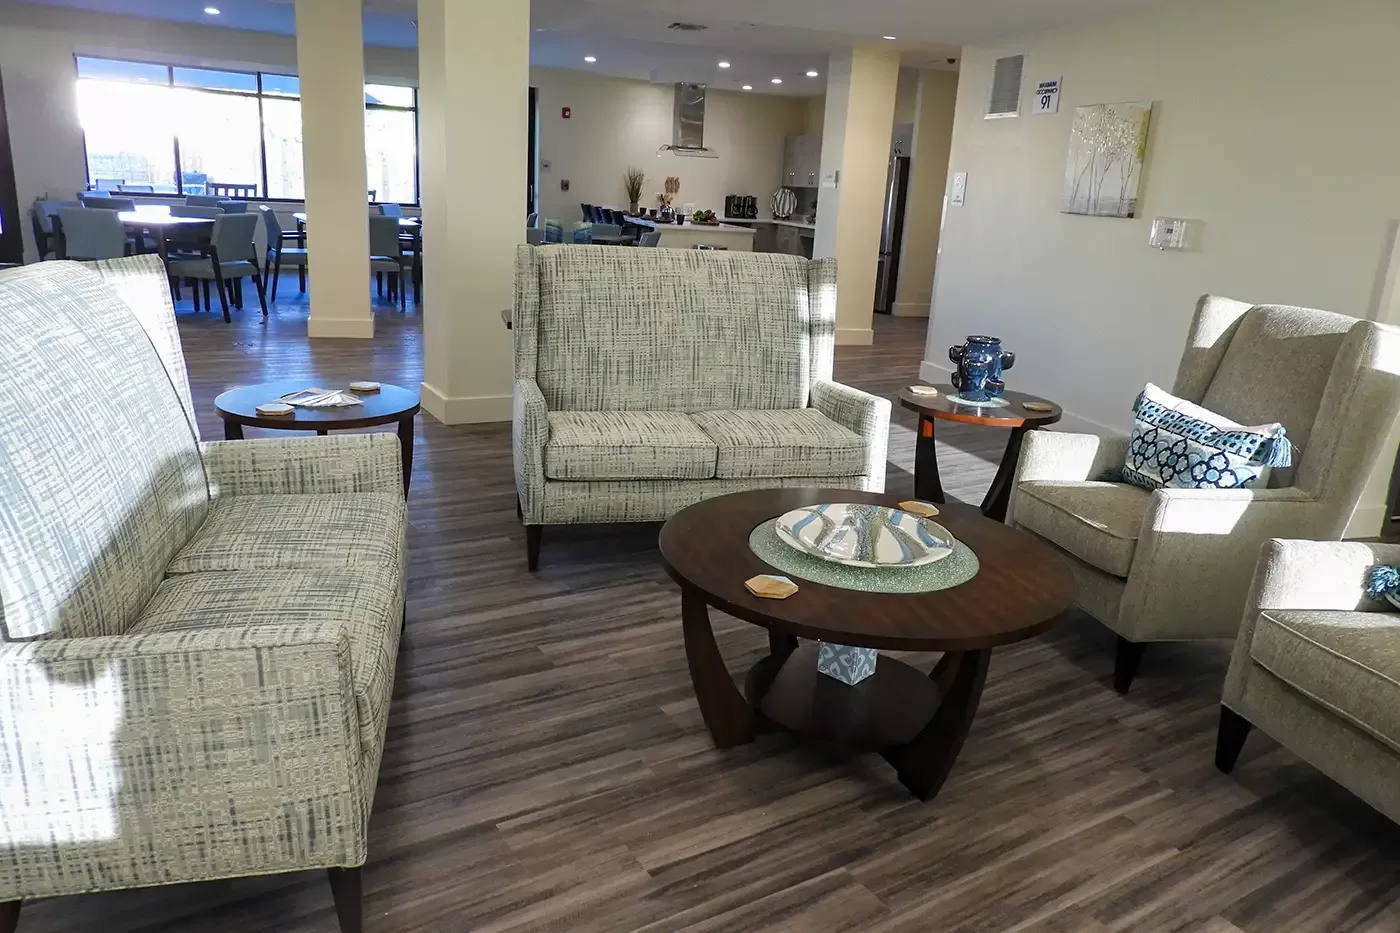 Photo of the common area at The Highlands Apartments in Grand Junction, Colorado